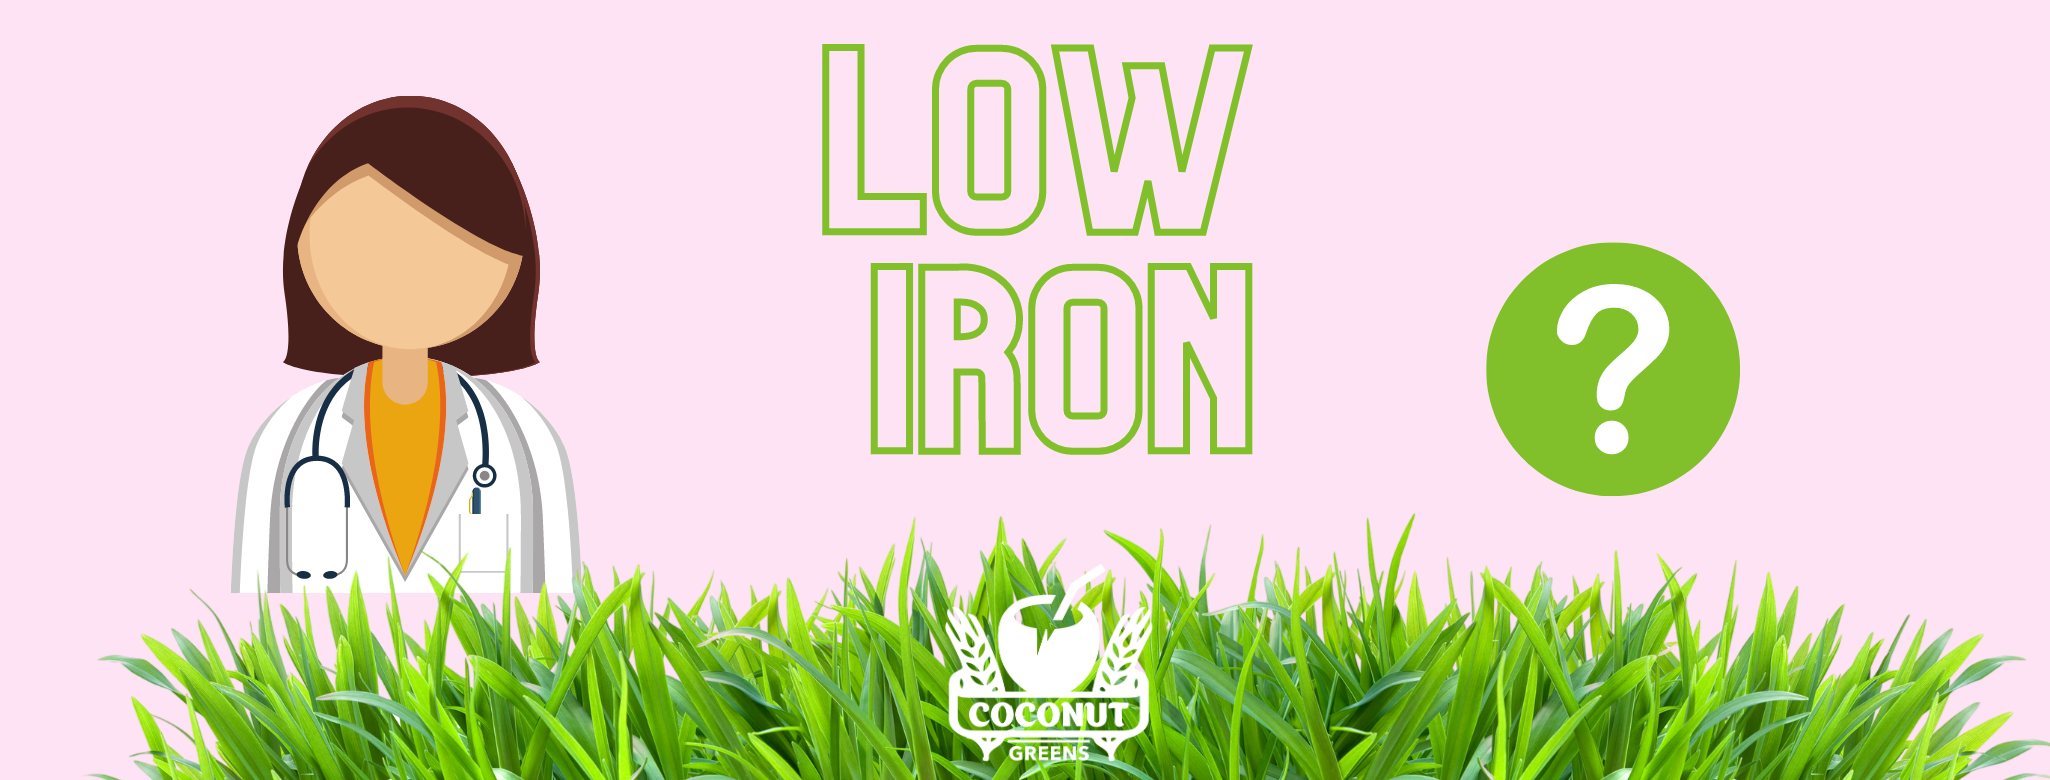 Iron boosting ideas with Coconut Greens: Super greens and coconut water - Iron Deficient